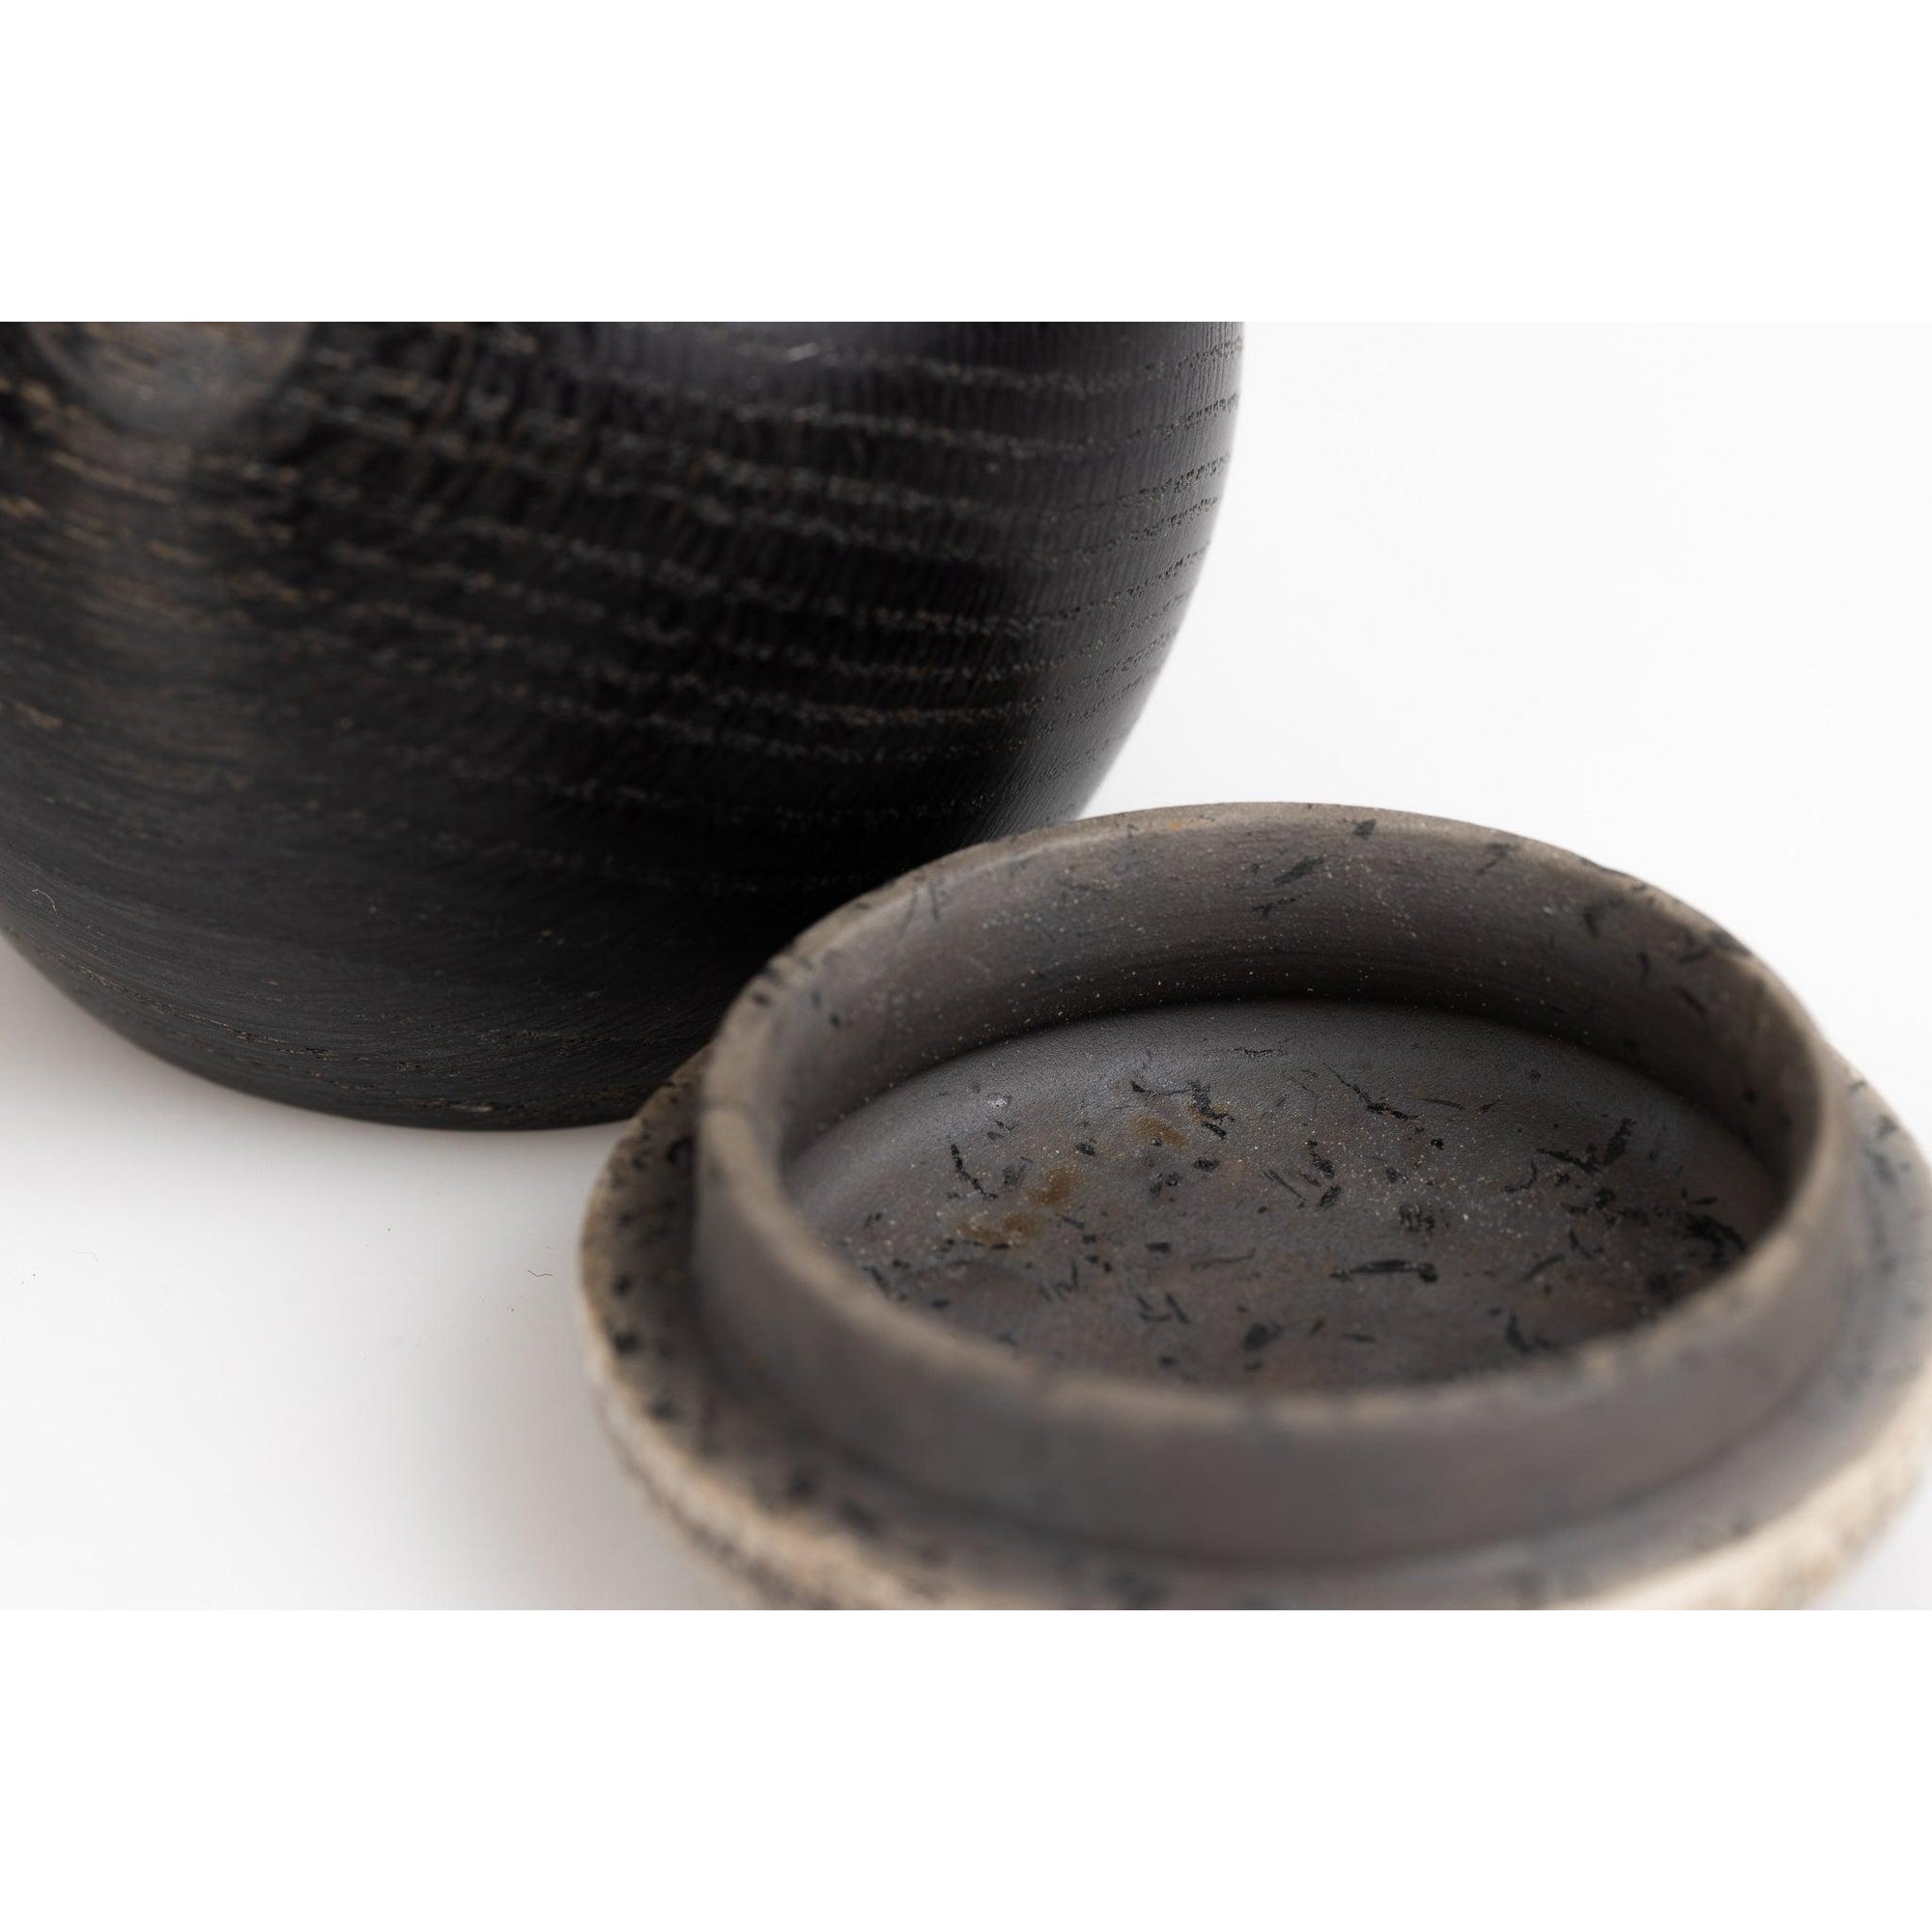 KSCC1 Ebonised Wave Pot by Kate Schuricht, available at Padstow Gallery, Cornwall